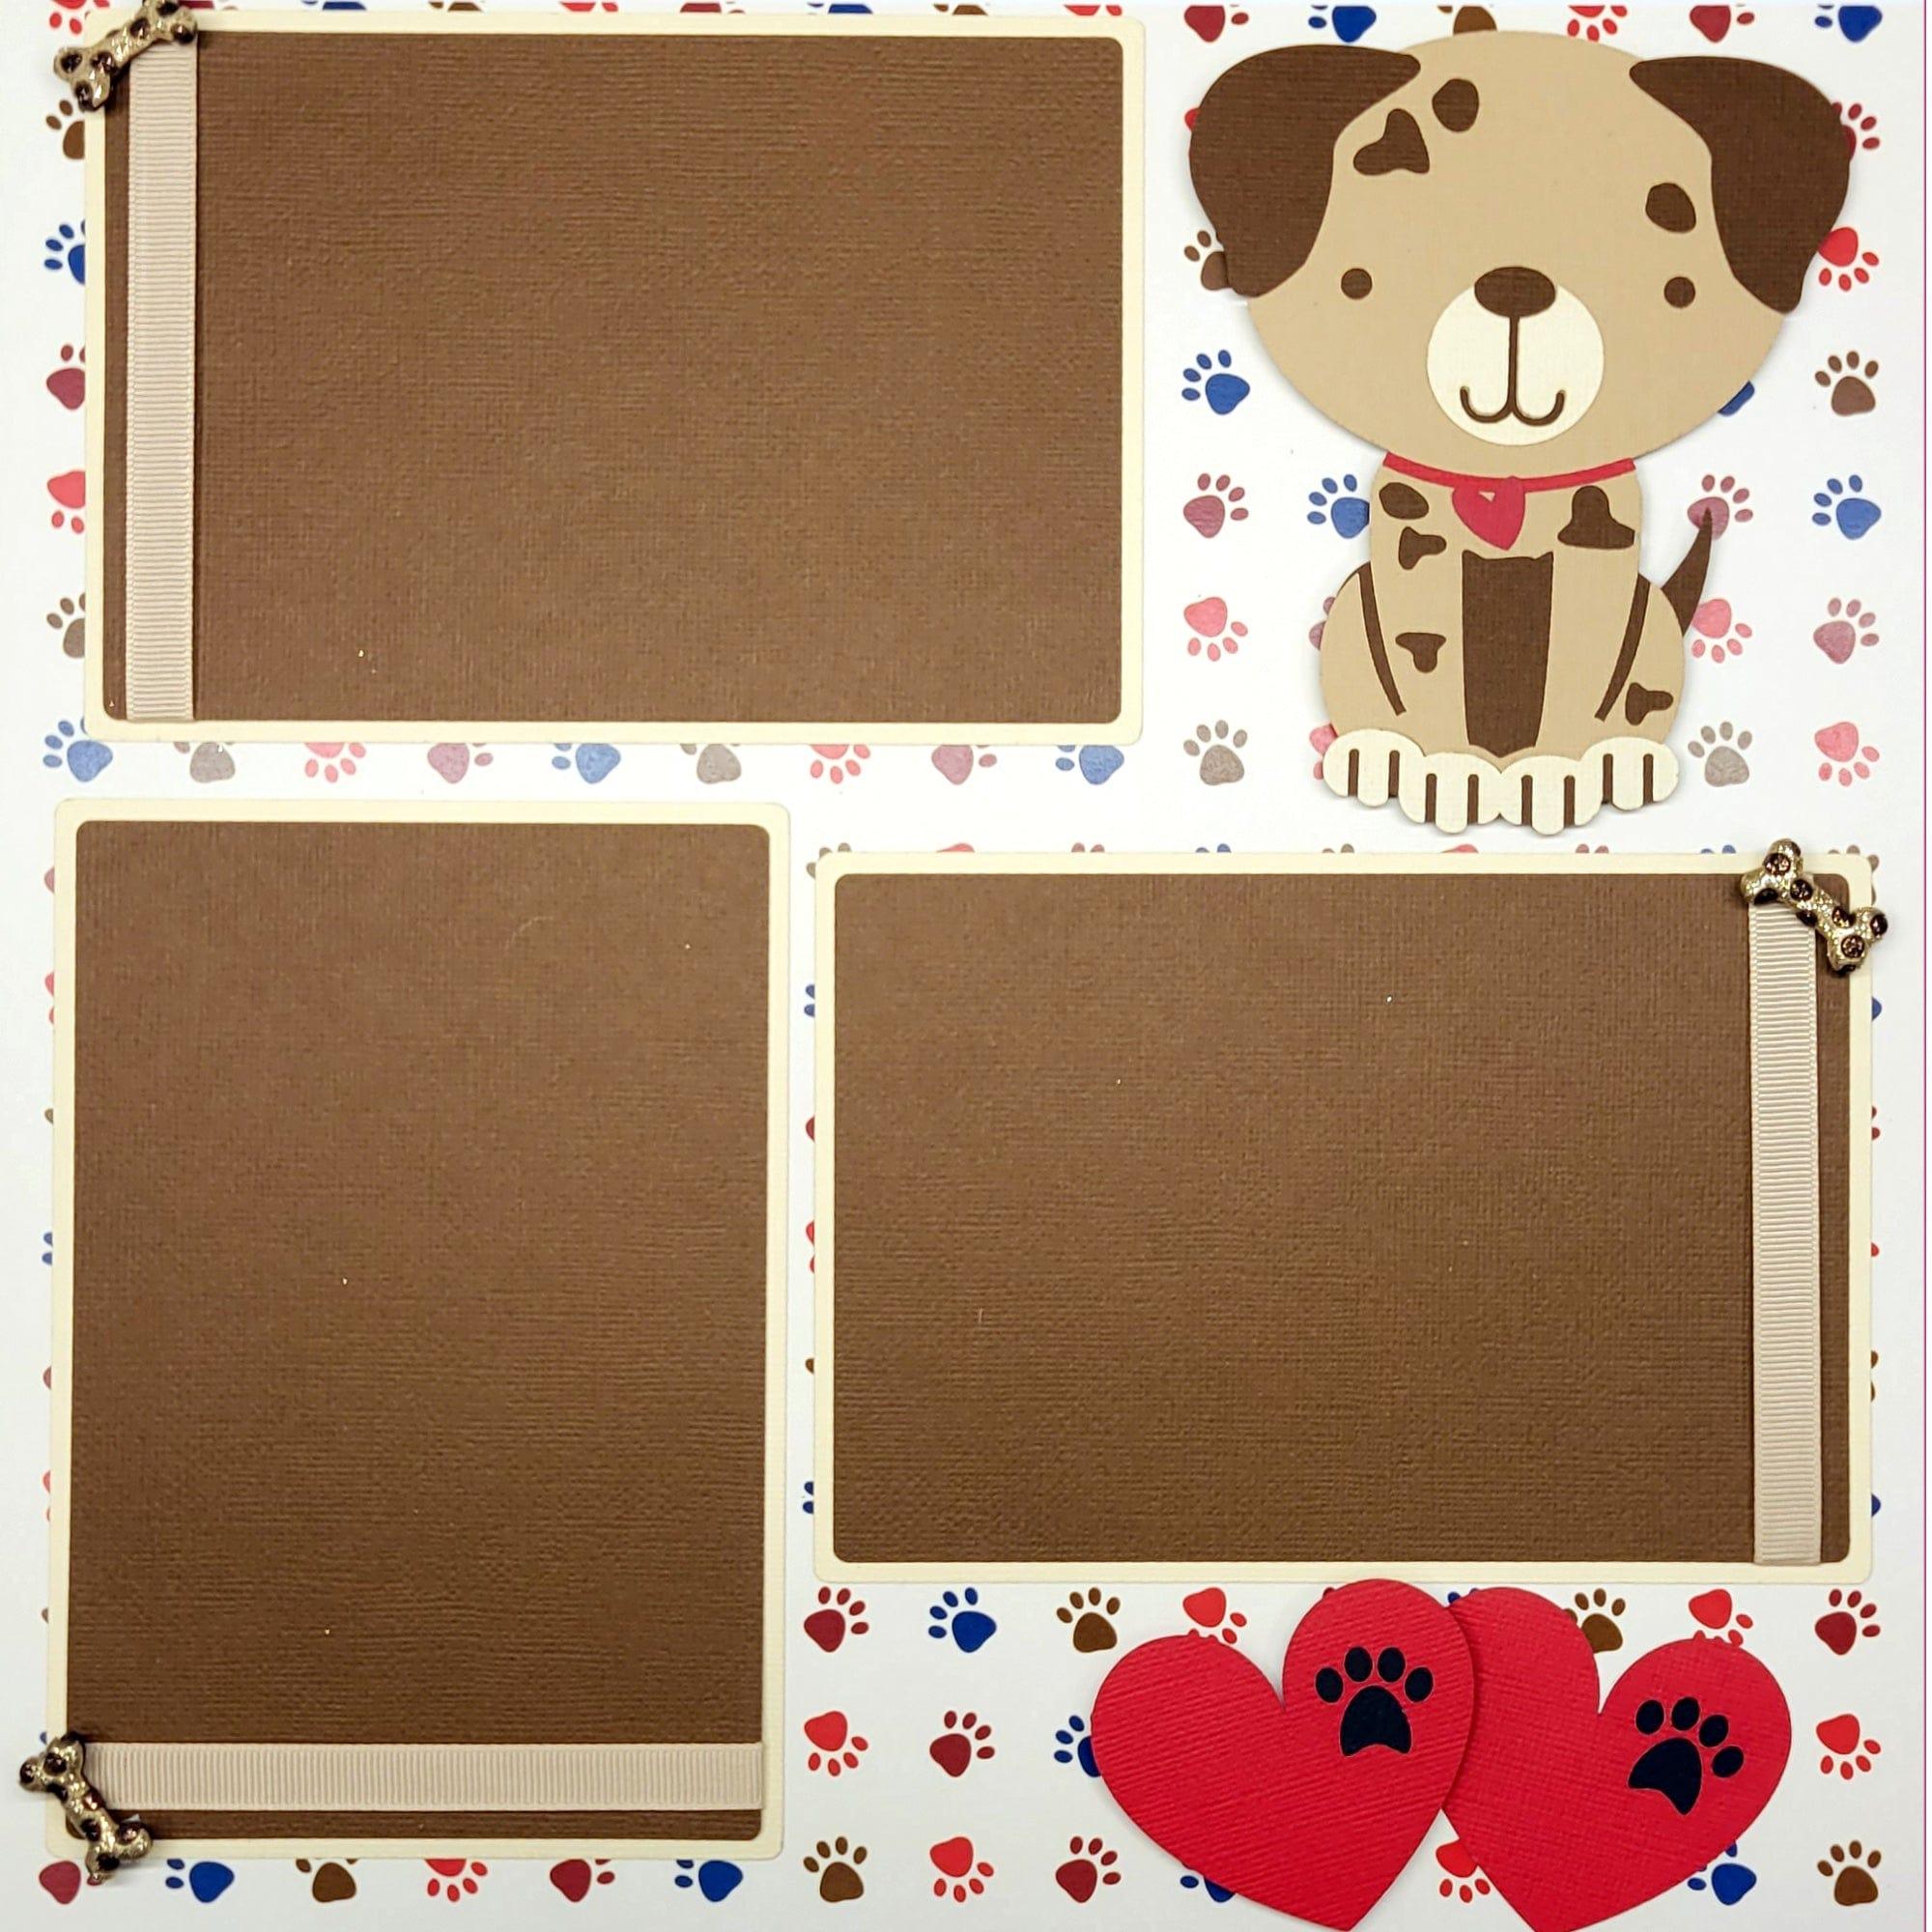 Puppy Love Premade, Hand-Embellished 2- 12 x 12 Scrapbook Page Premades by SSC Designs - Scrapbook Supply Companies